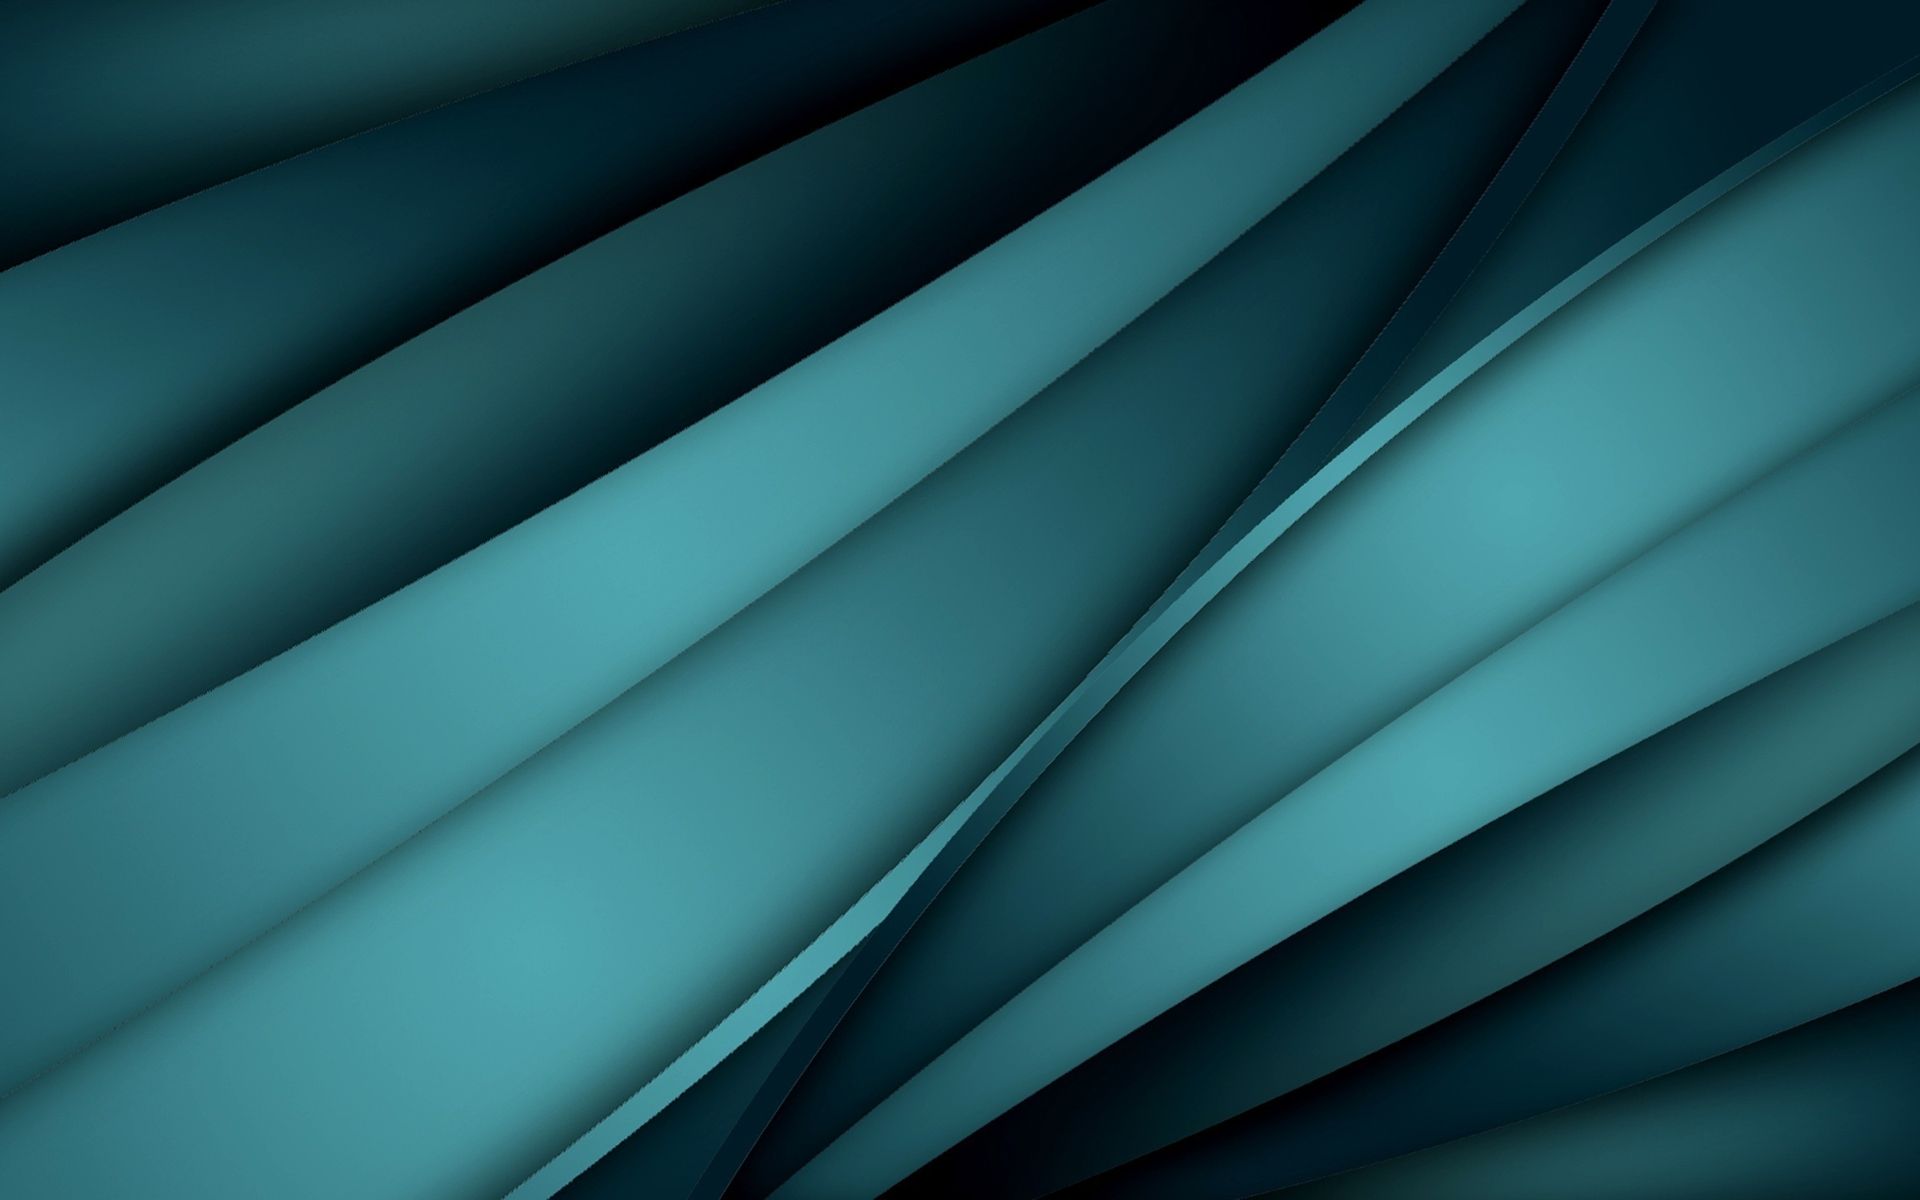 Abstract Art Using Lines in 3D with Tosca and Black Wallpaper. Wallpaper Download. High Resolution Wallpaper